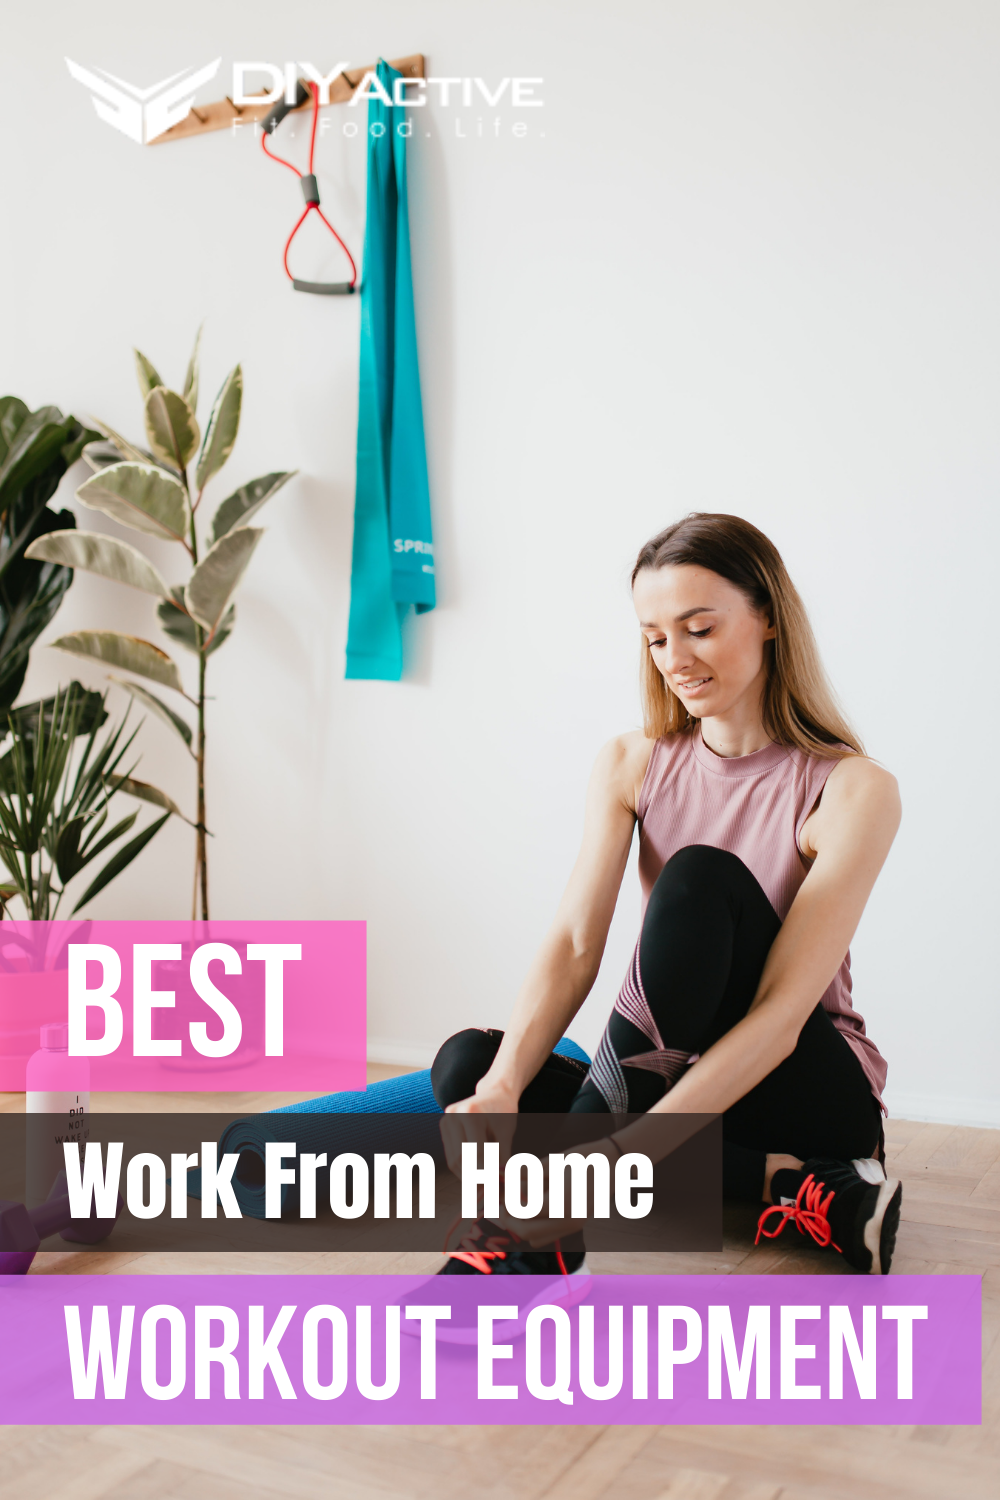 Workout Equipment for the Work from Home Lifestyle